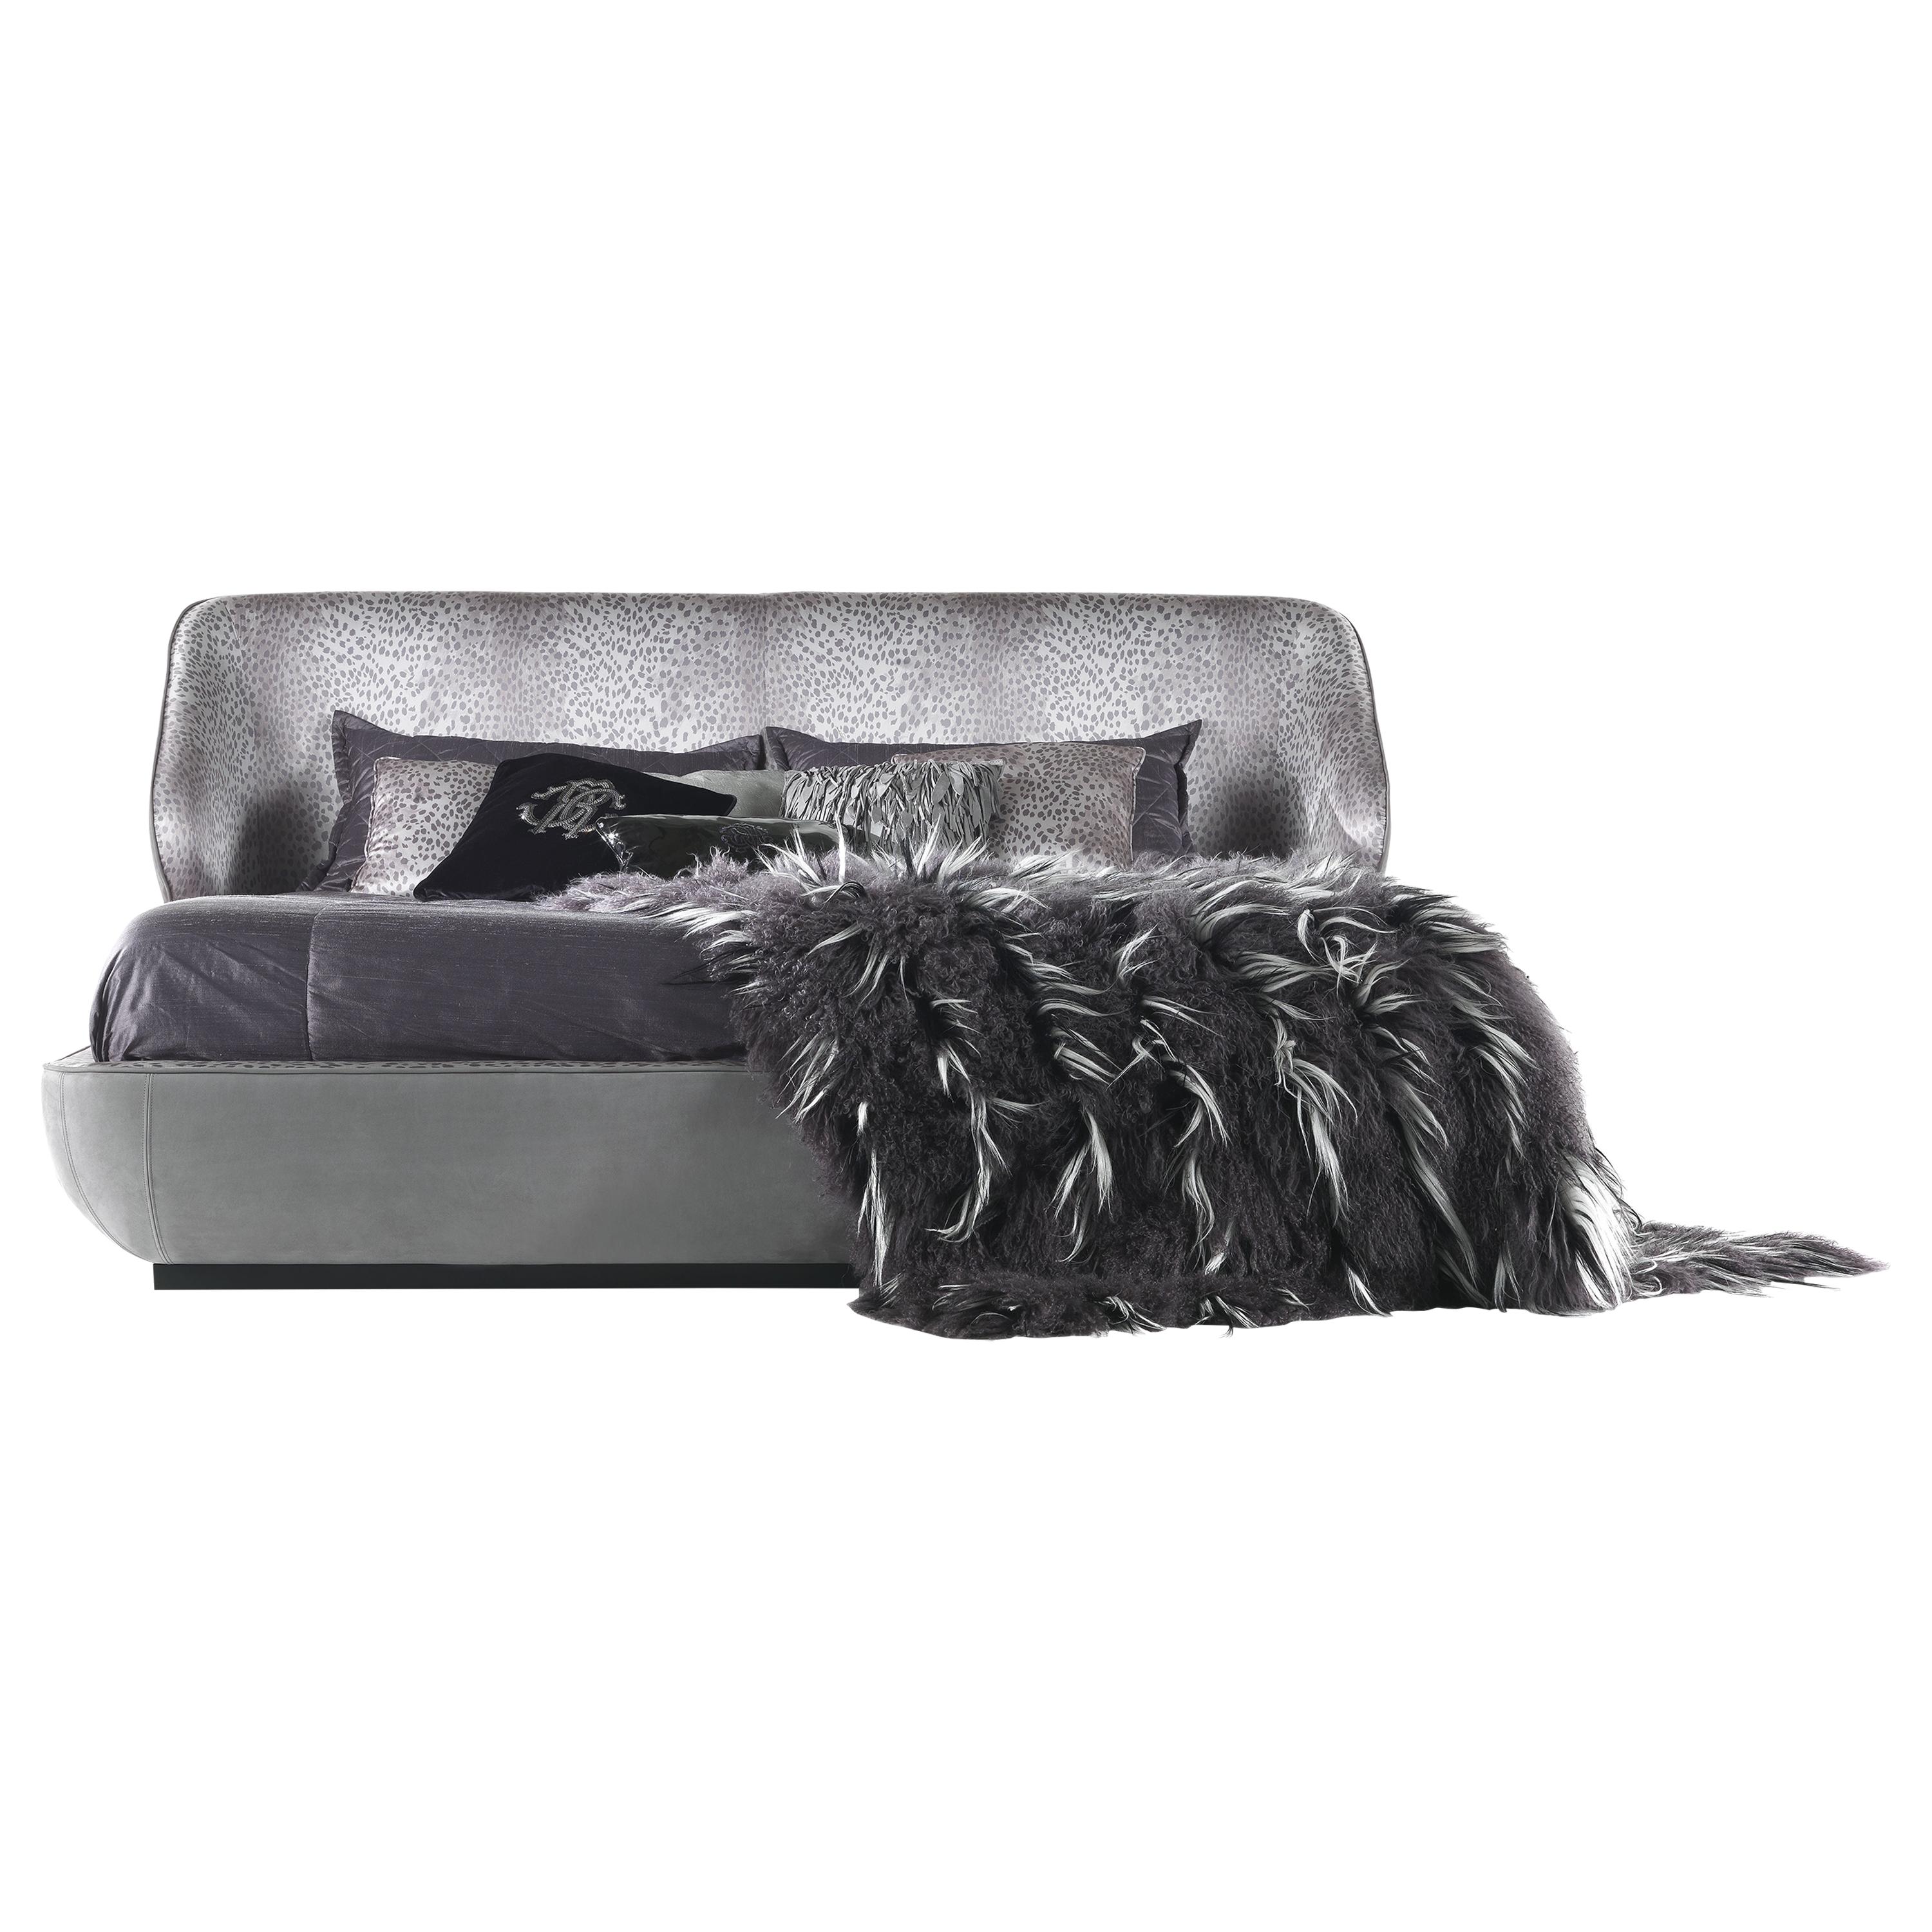 Key West Bed in Leather and Fabric by Roberto Cavalli Home Interiors